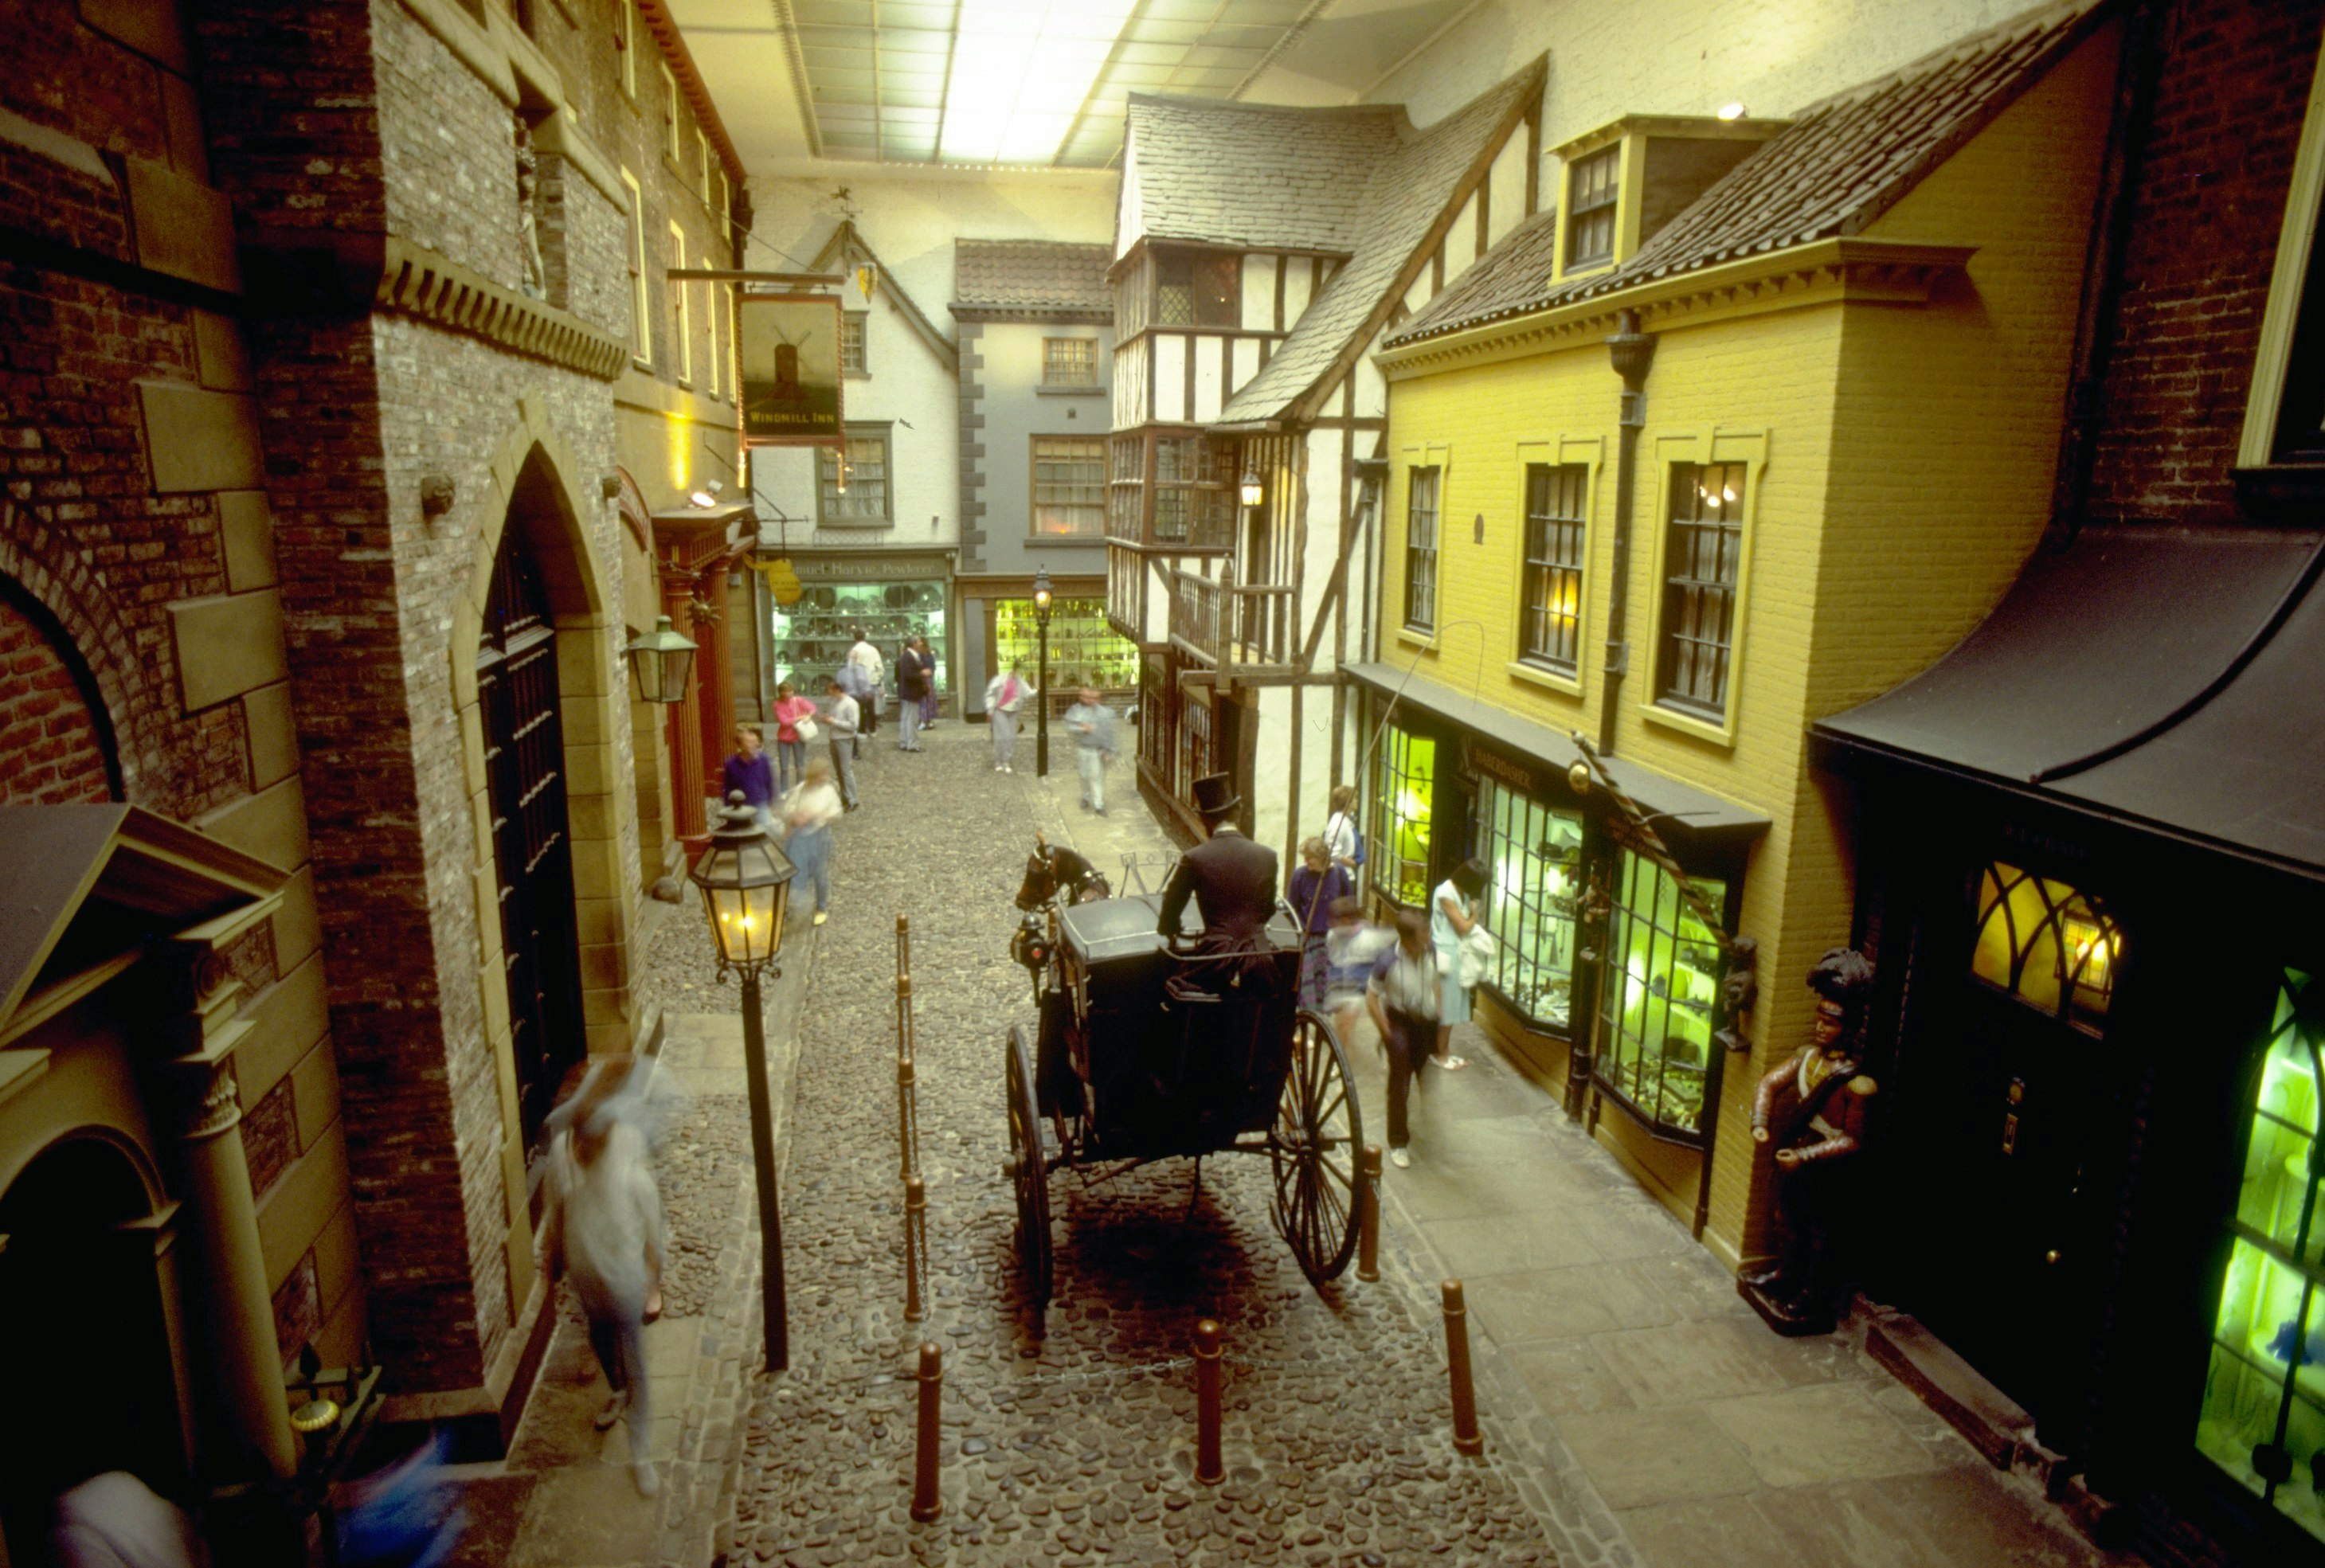 Visitors walk along model shops and carriages of a Victorian street scene in the York Castle Museum in York, England.
Victorian Street in York Castle Museum - stock photo

